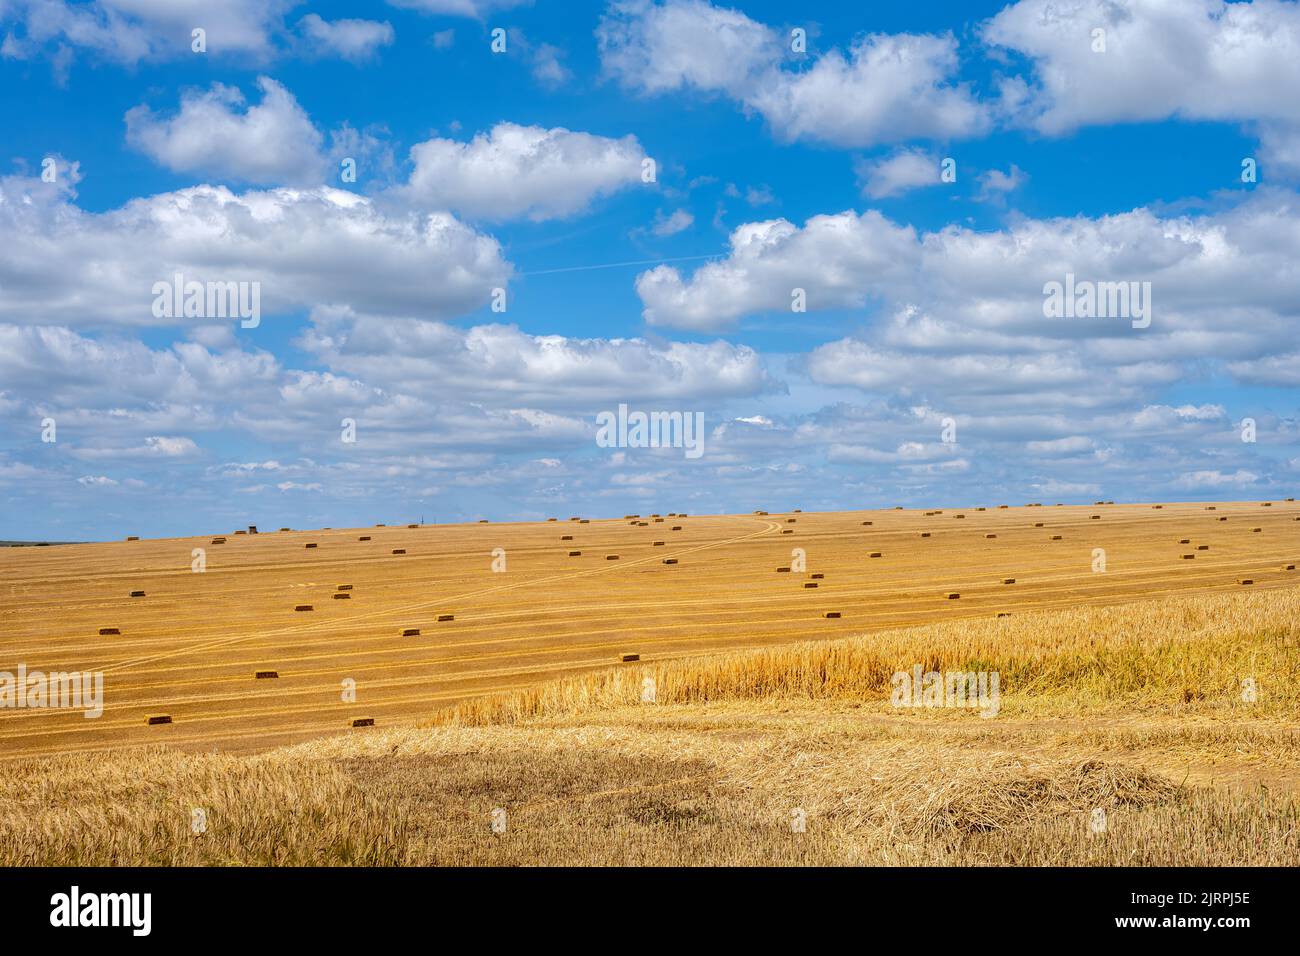 View of a cereal field with square straw bales in the South Downs National Park, East Sussex, England Stock Photo